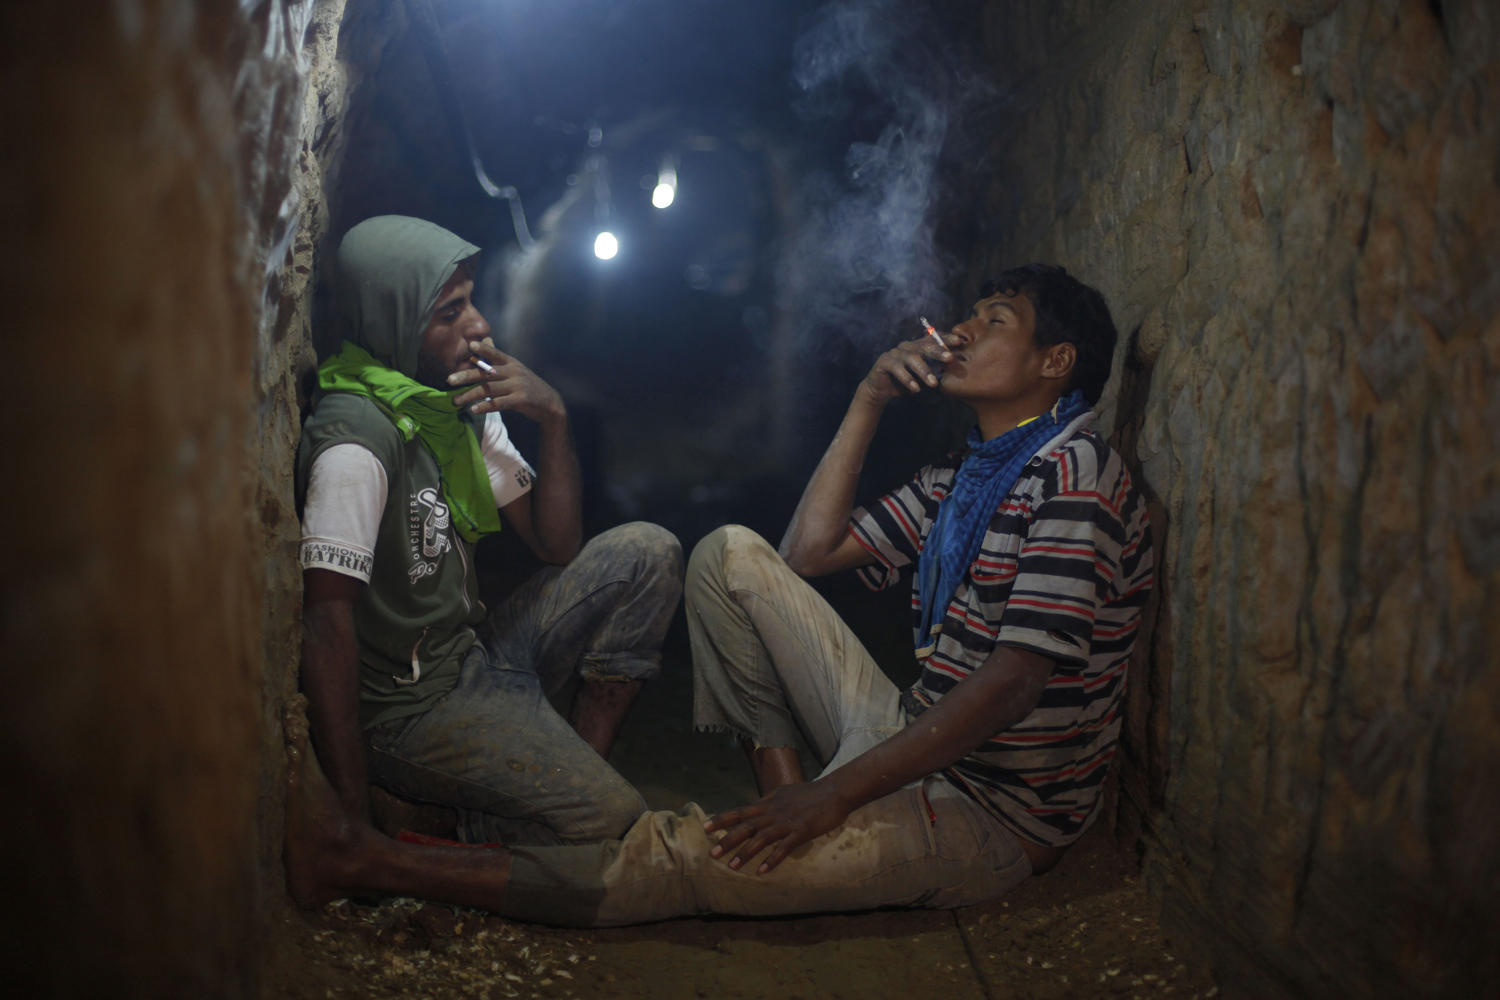 Palestinian tunnel workers smoke cigarettes as they rest inside a smuggling tunnel flooded by Egyptian security forces, beneath the Gaza-Egypt border in the southern Gaza Strip